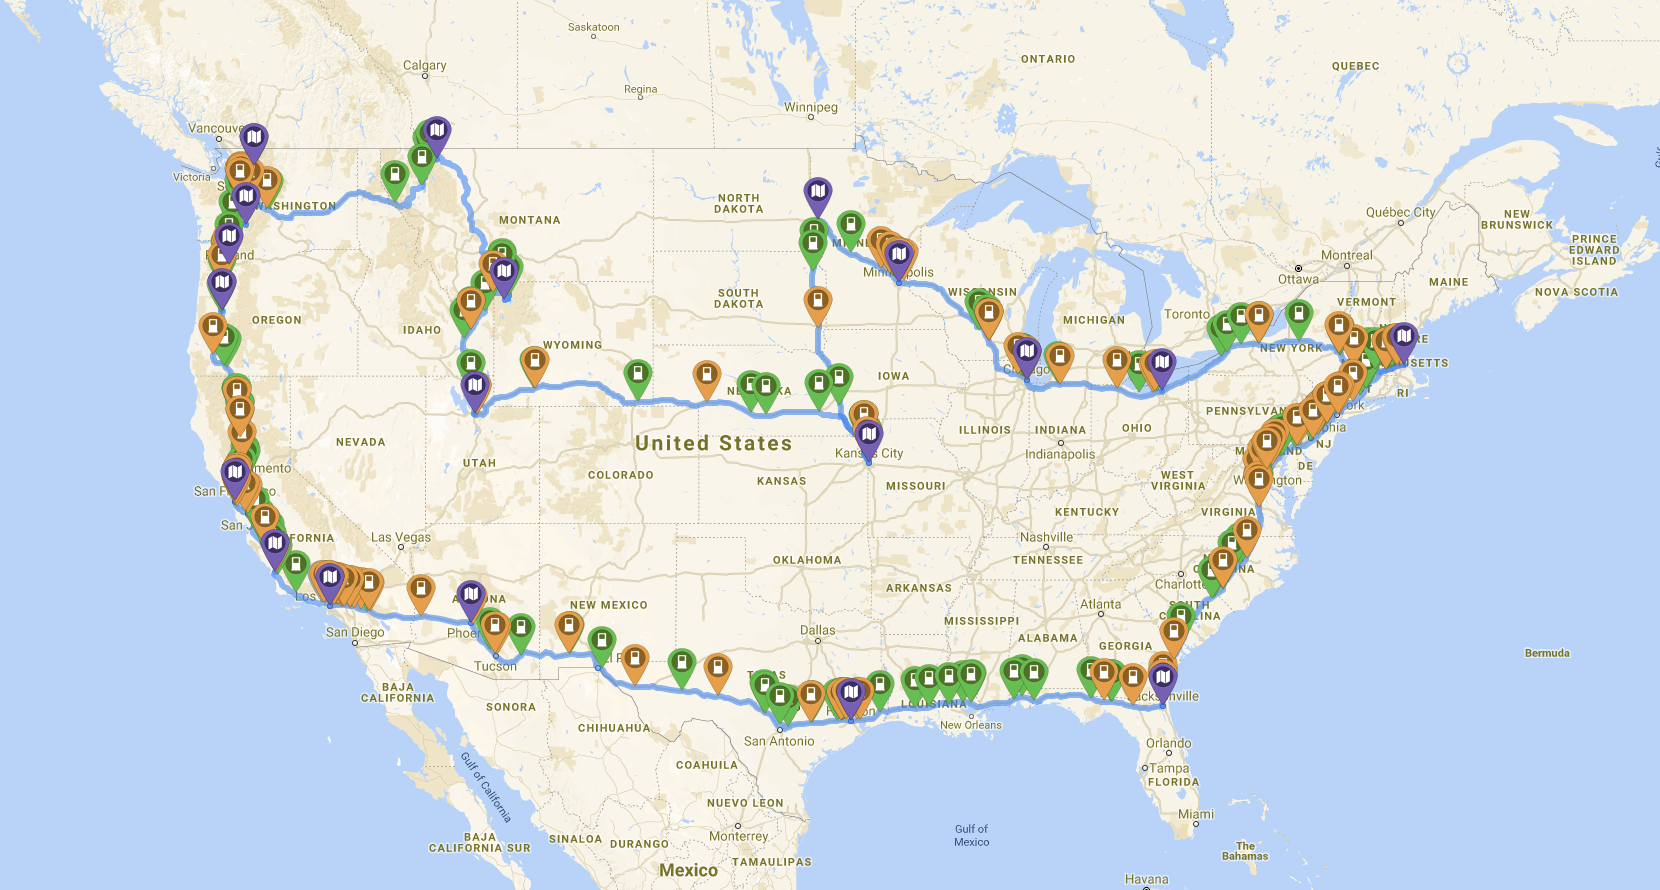 The ultimate American road trip to take in an electric vehicle